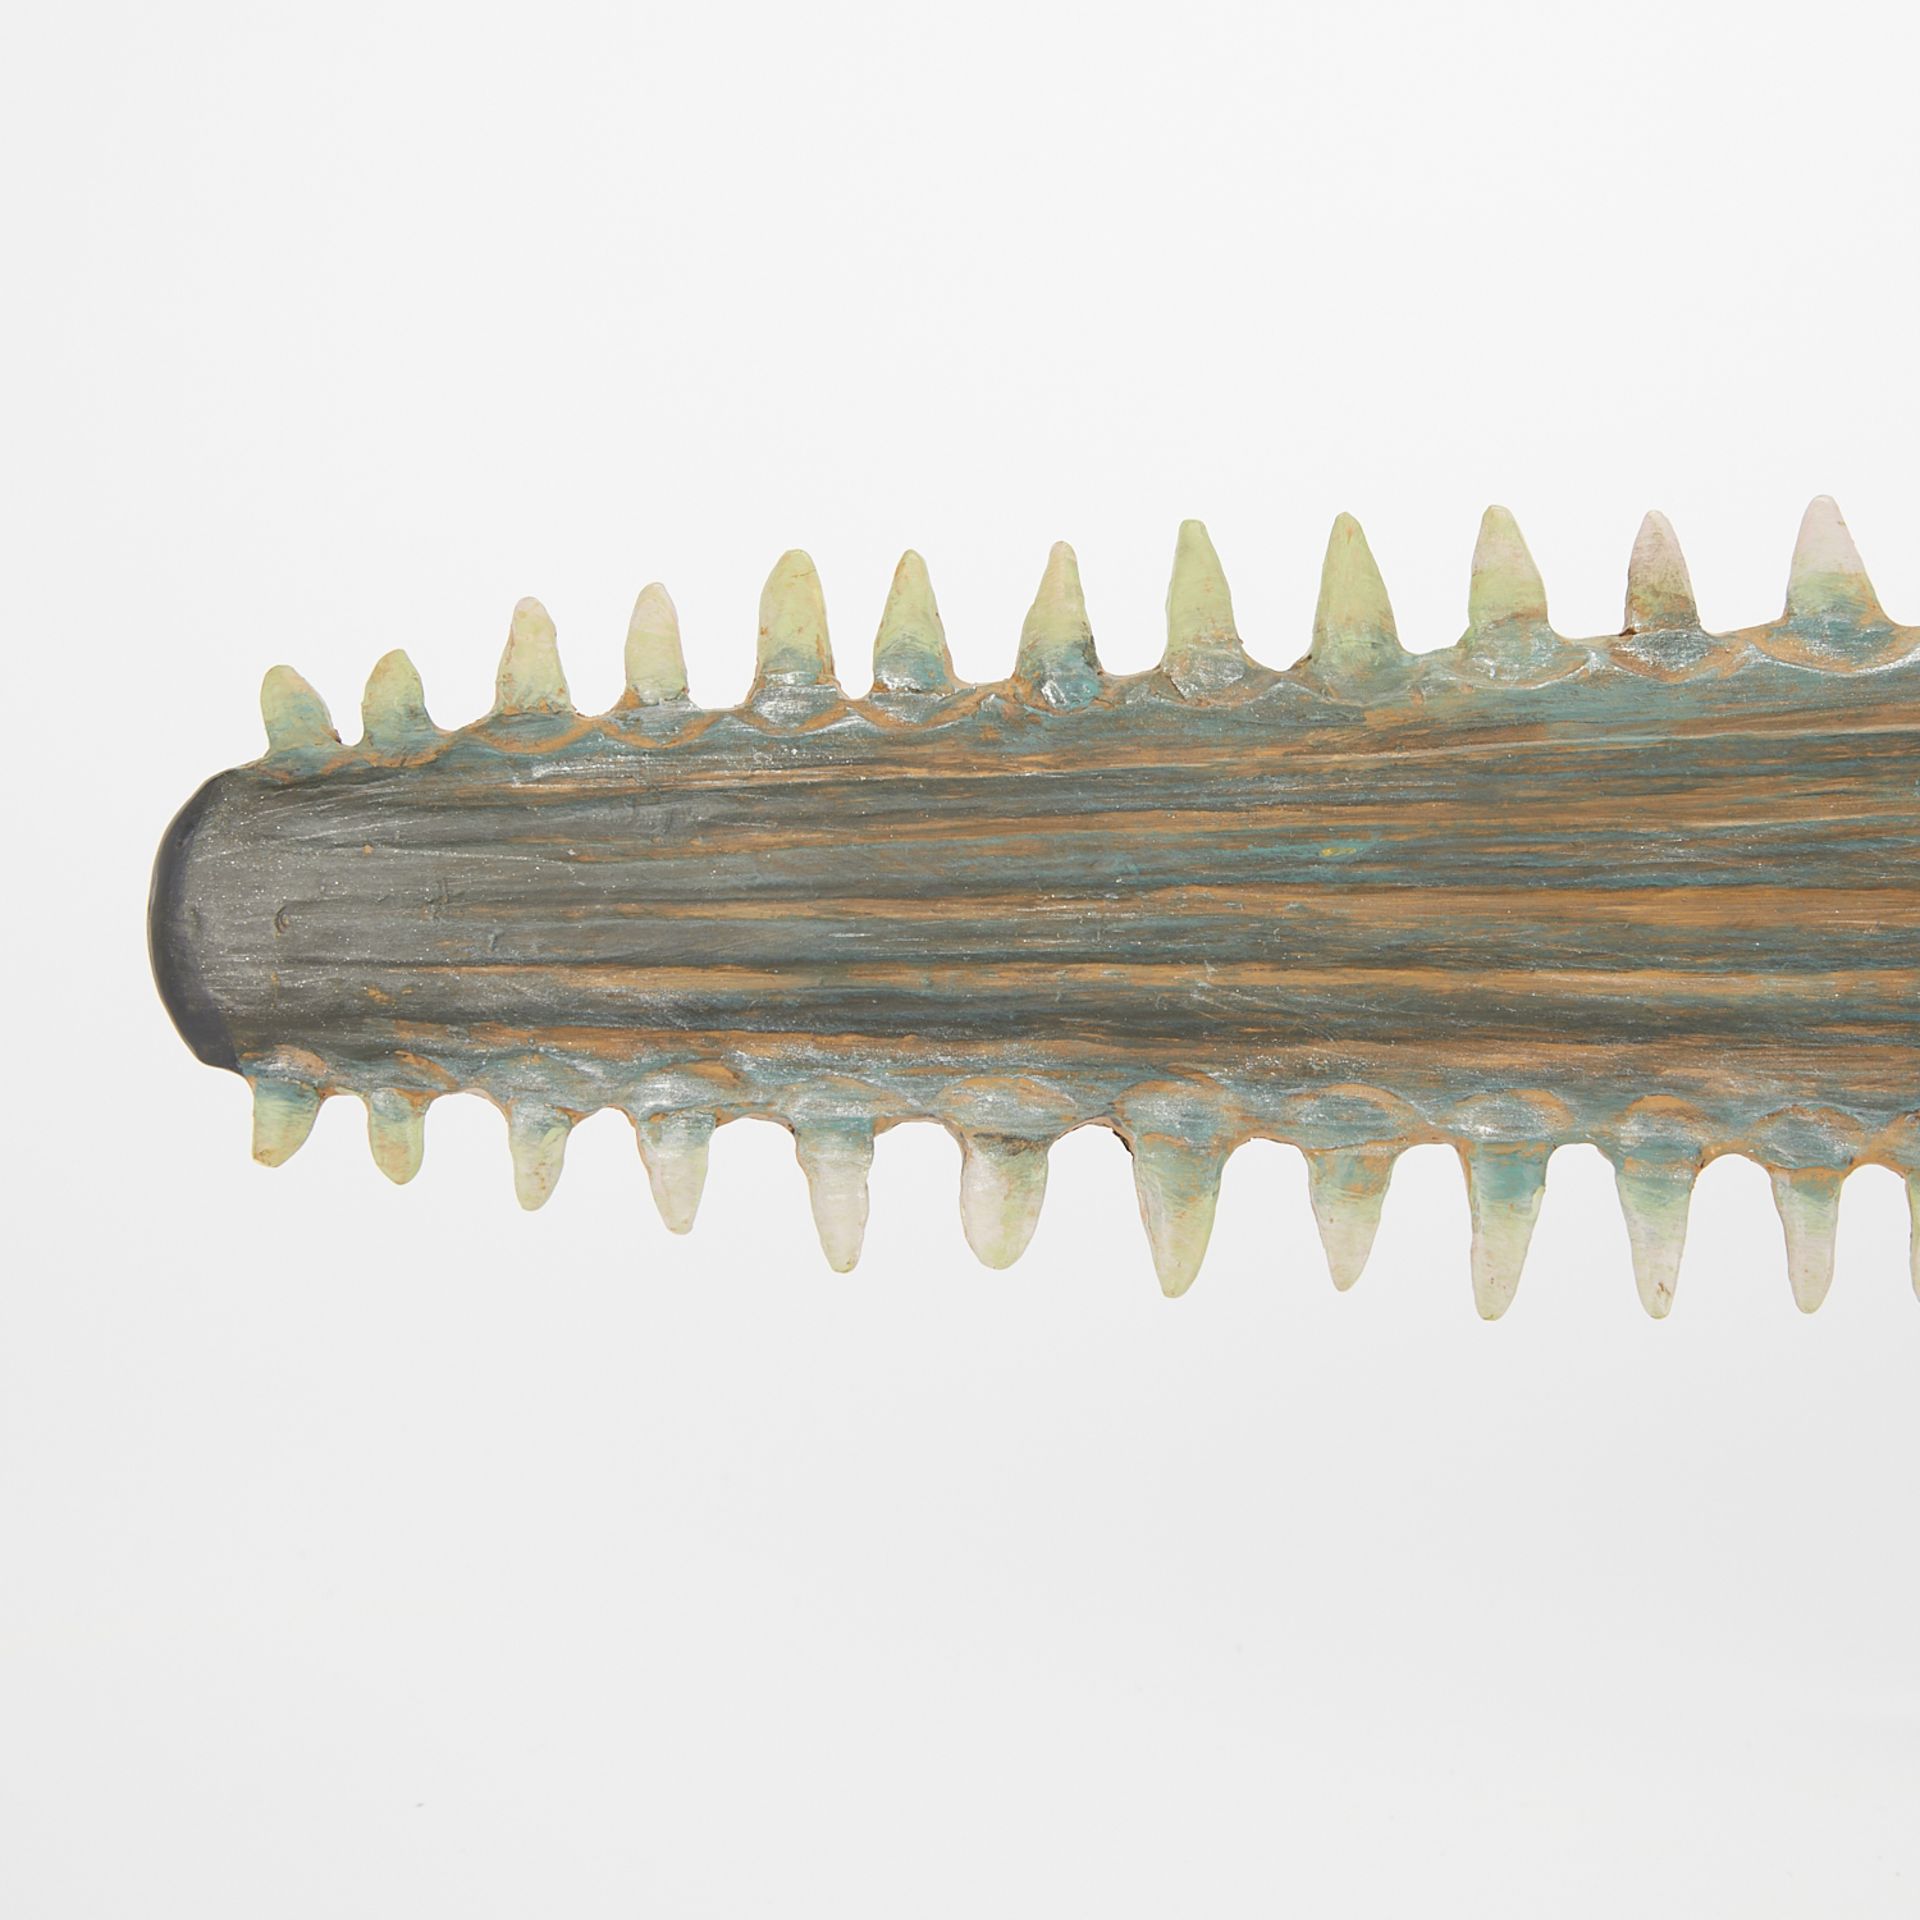 Dr. Seuss "Sawfish" Wall Mount Sculpture - Image 8 of 12